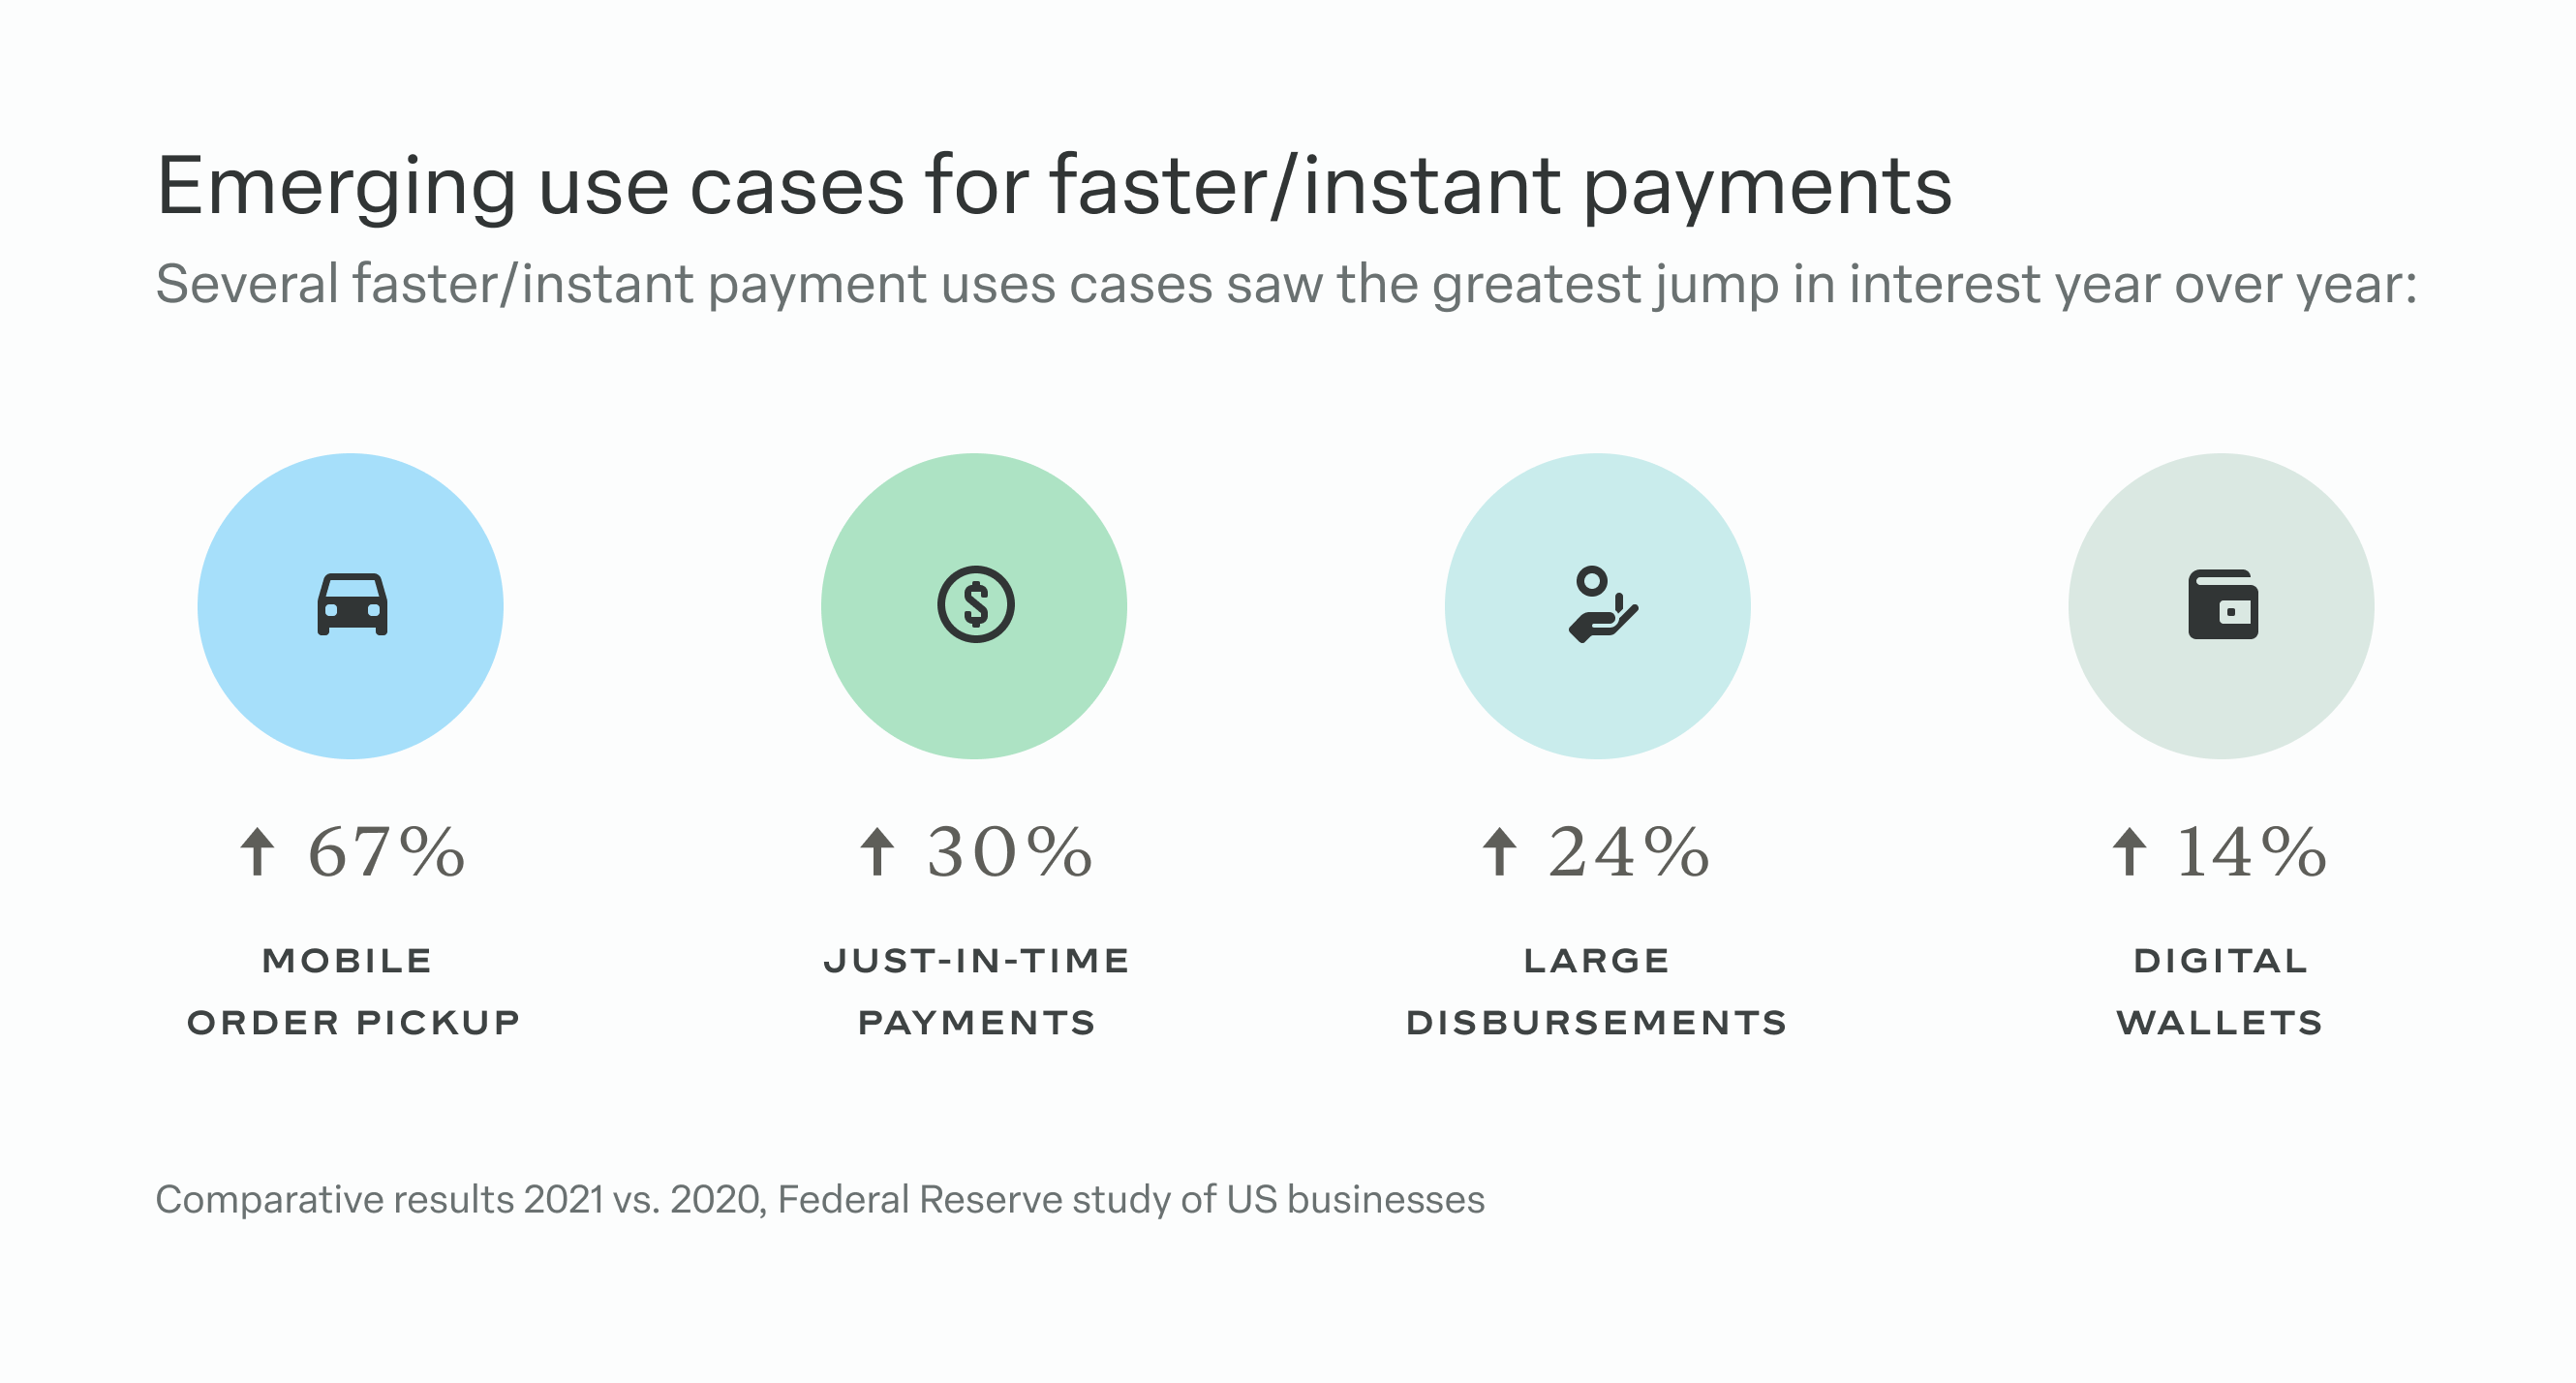 Graphic showing the four faster payments use cases that have seen the biggest jump in interest for businesses year-over-year: mobile order pickup, just-in-time payments, large disbursements, and digital wallets. 